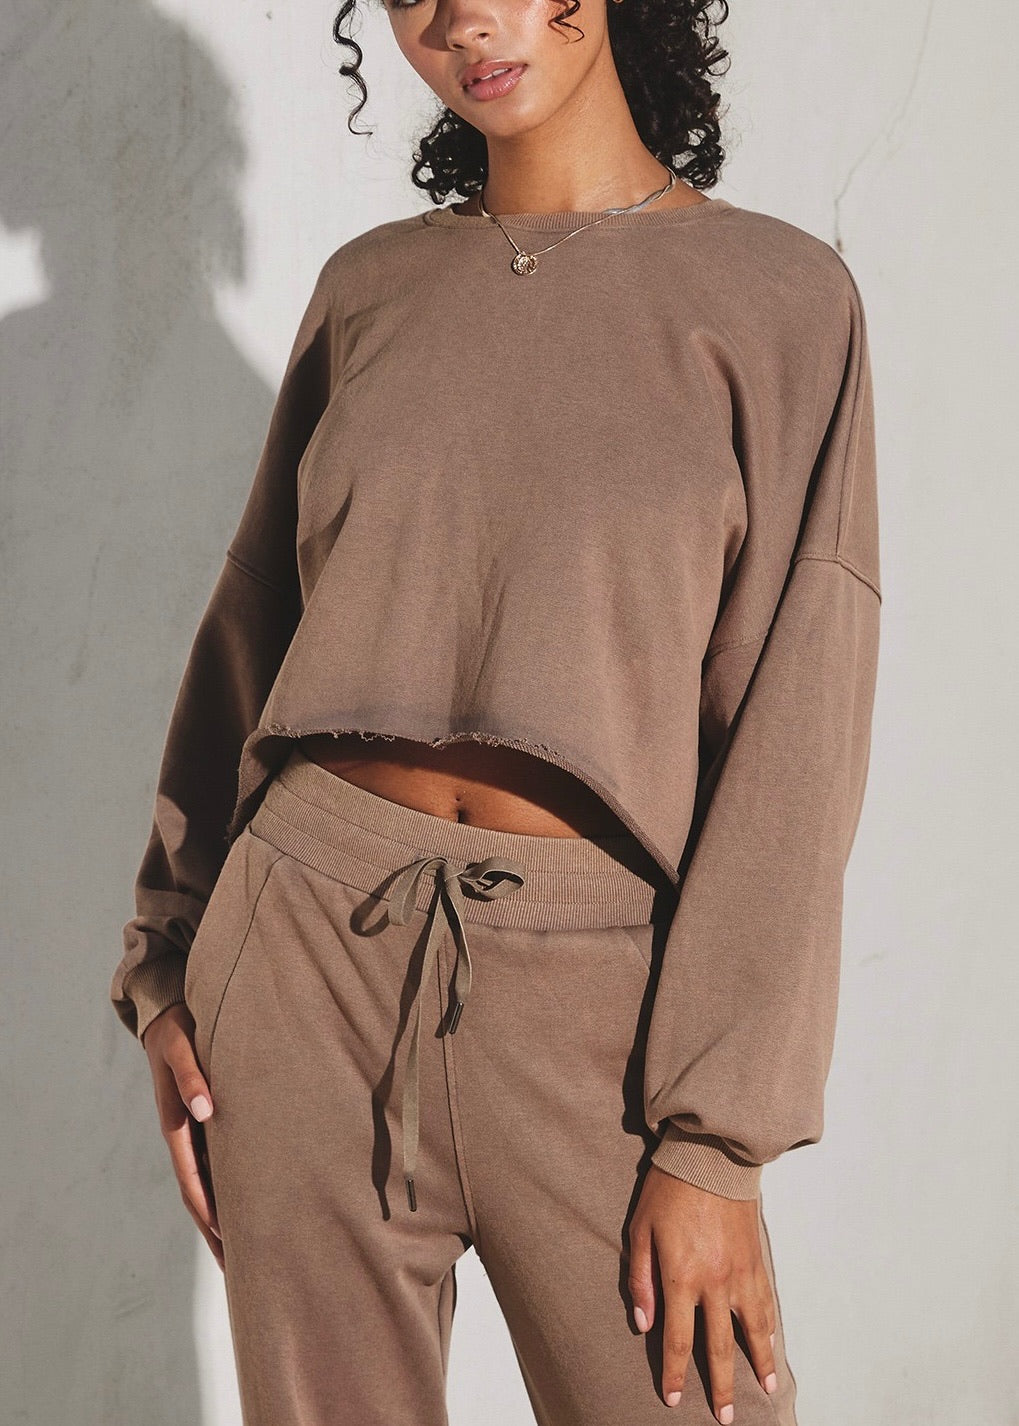 Lonny Cropped Pullover